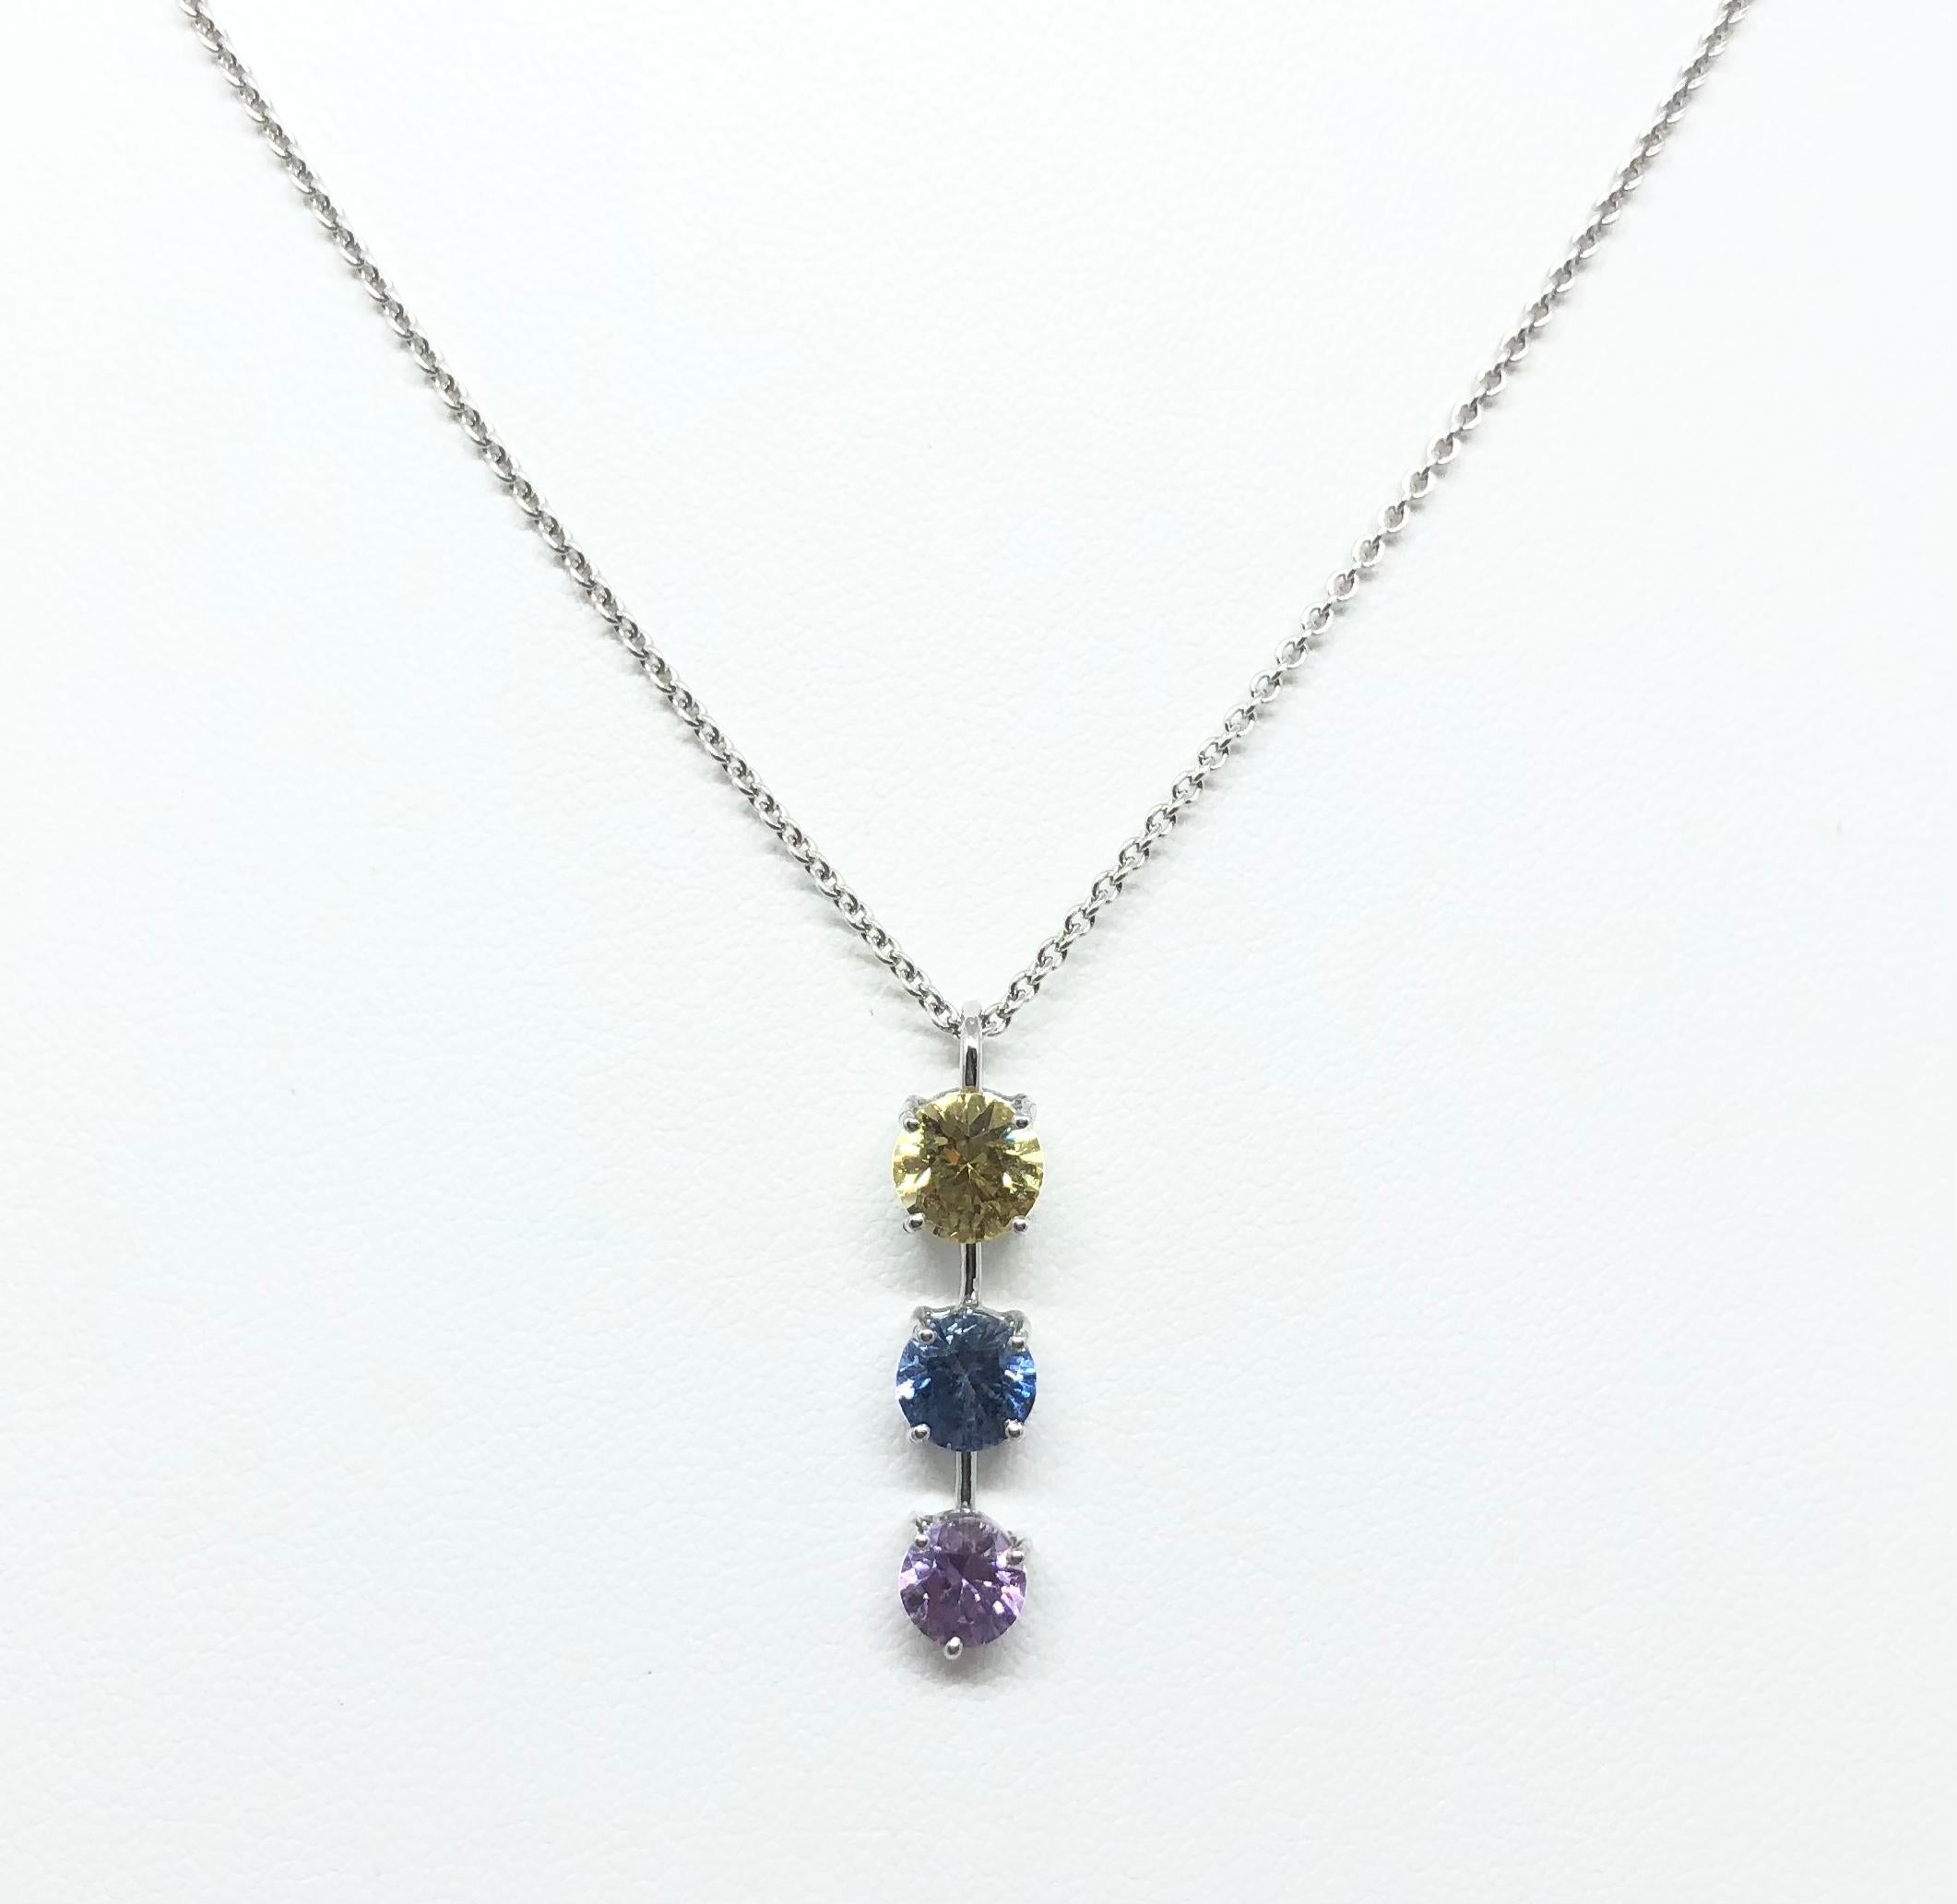 Rainbow Colour Sapphire 2.11 carats Pendant set in 18 Karat White Gold Settings
(chain not included)

Width: 0.6 cm 
Length: 2.5 cm
Total Weight: 1.5  grams

